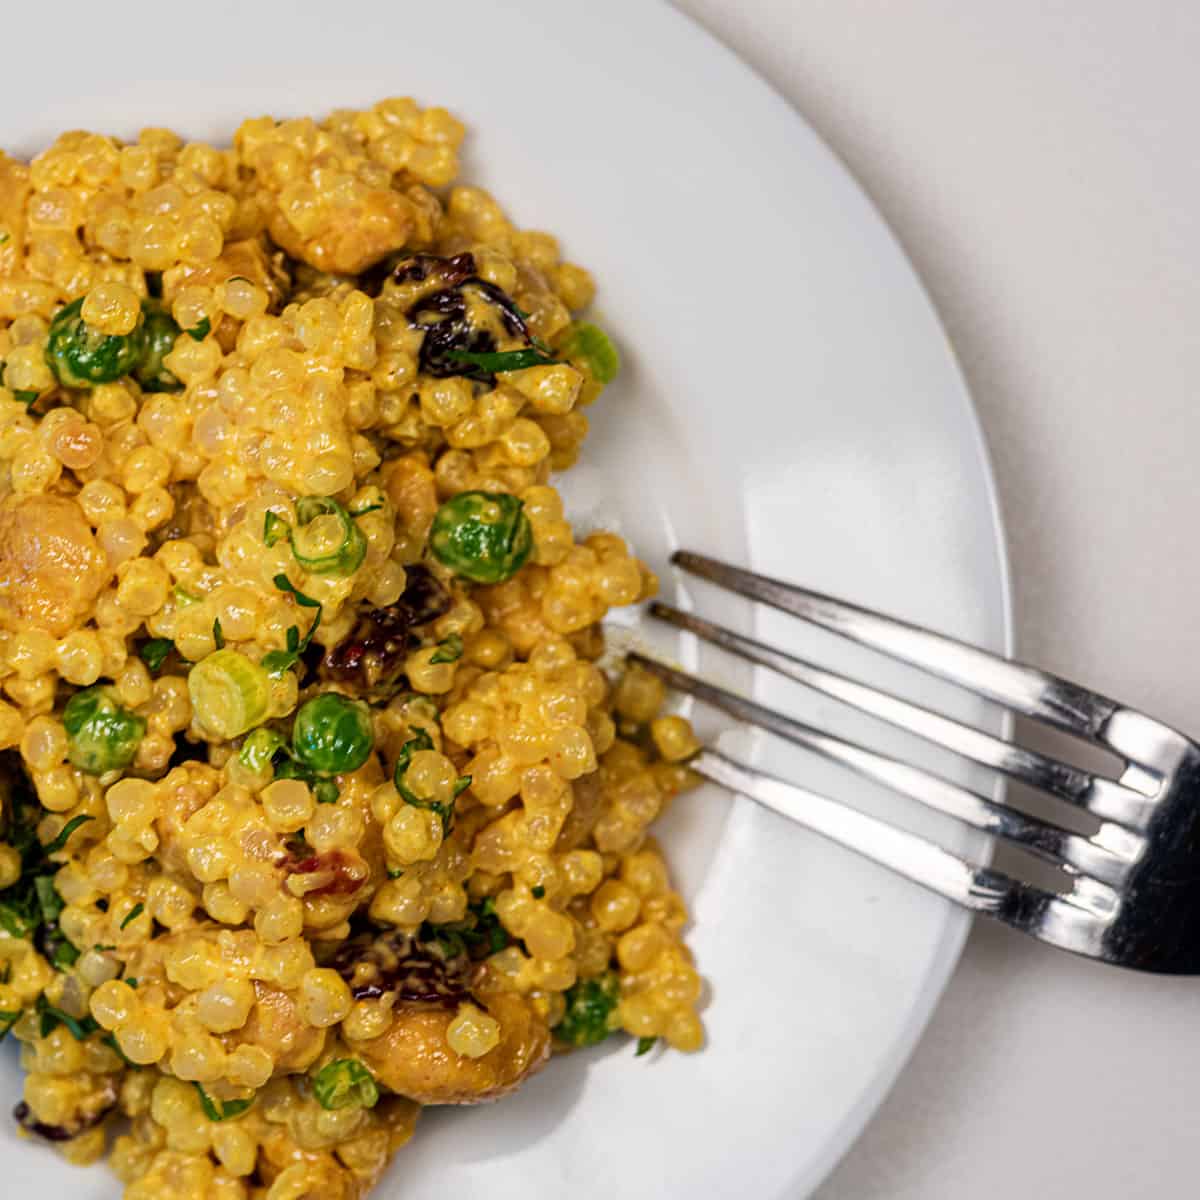 Dish of vegan curried Israeli couscous salad with cashews and cranberries.